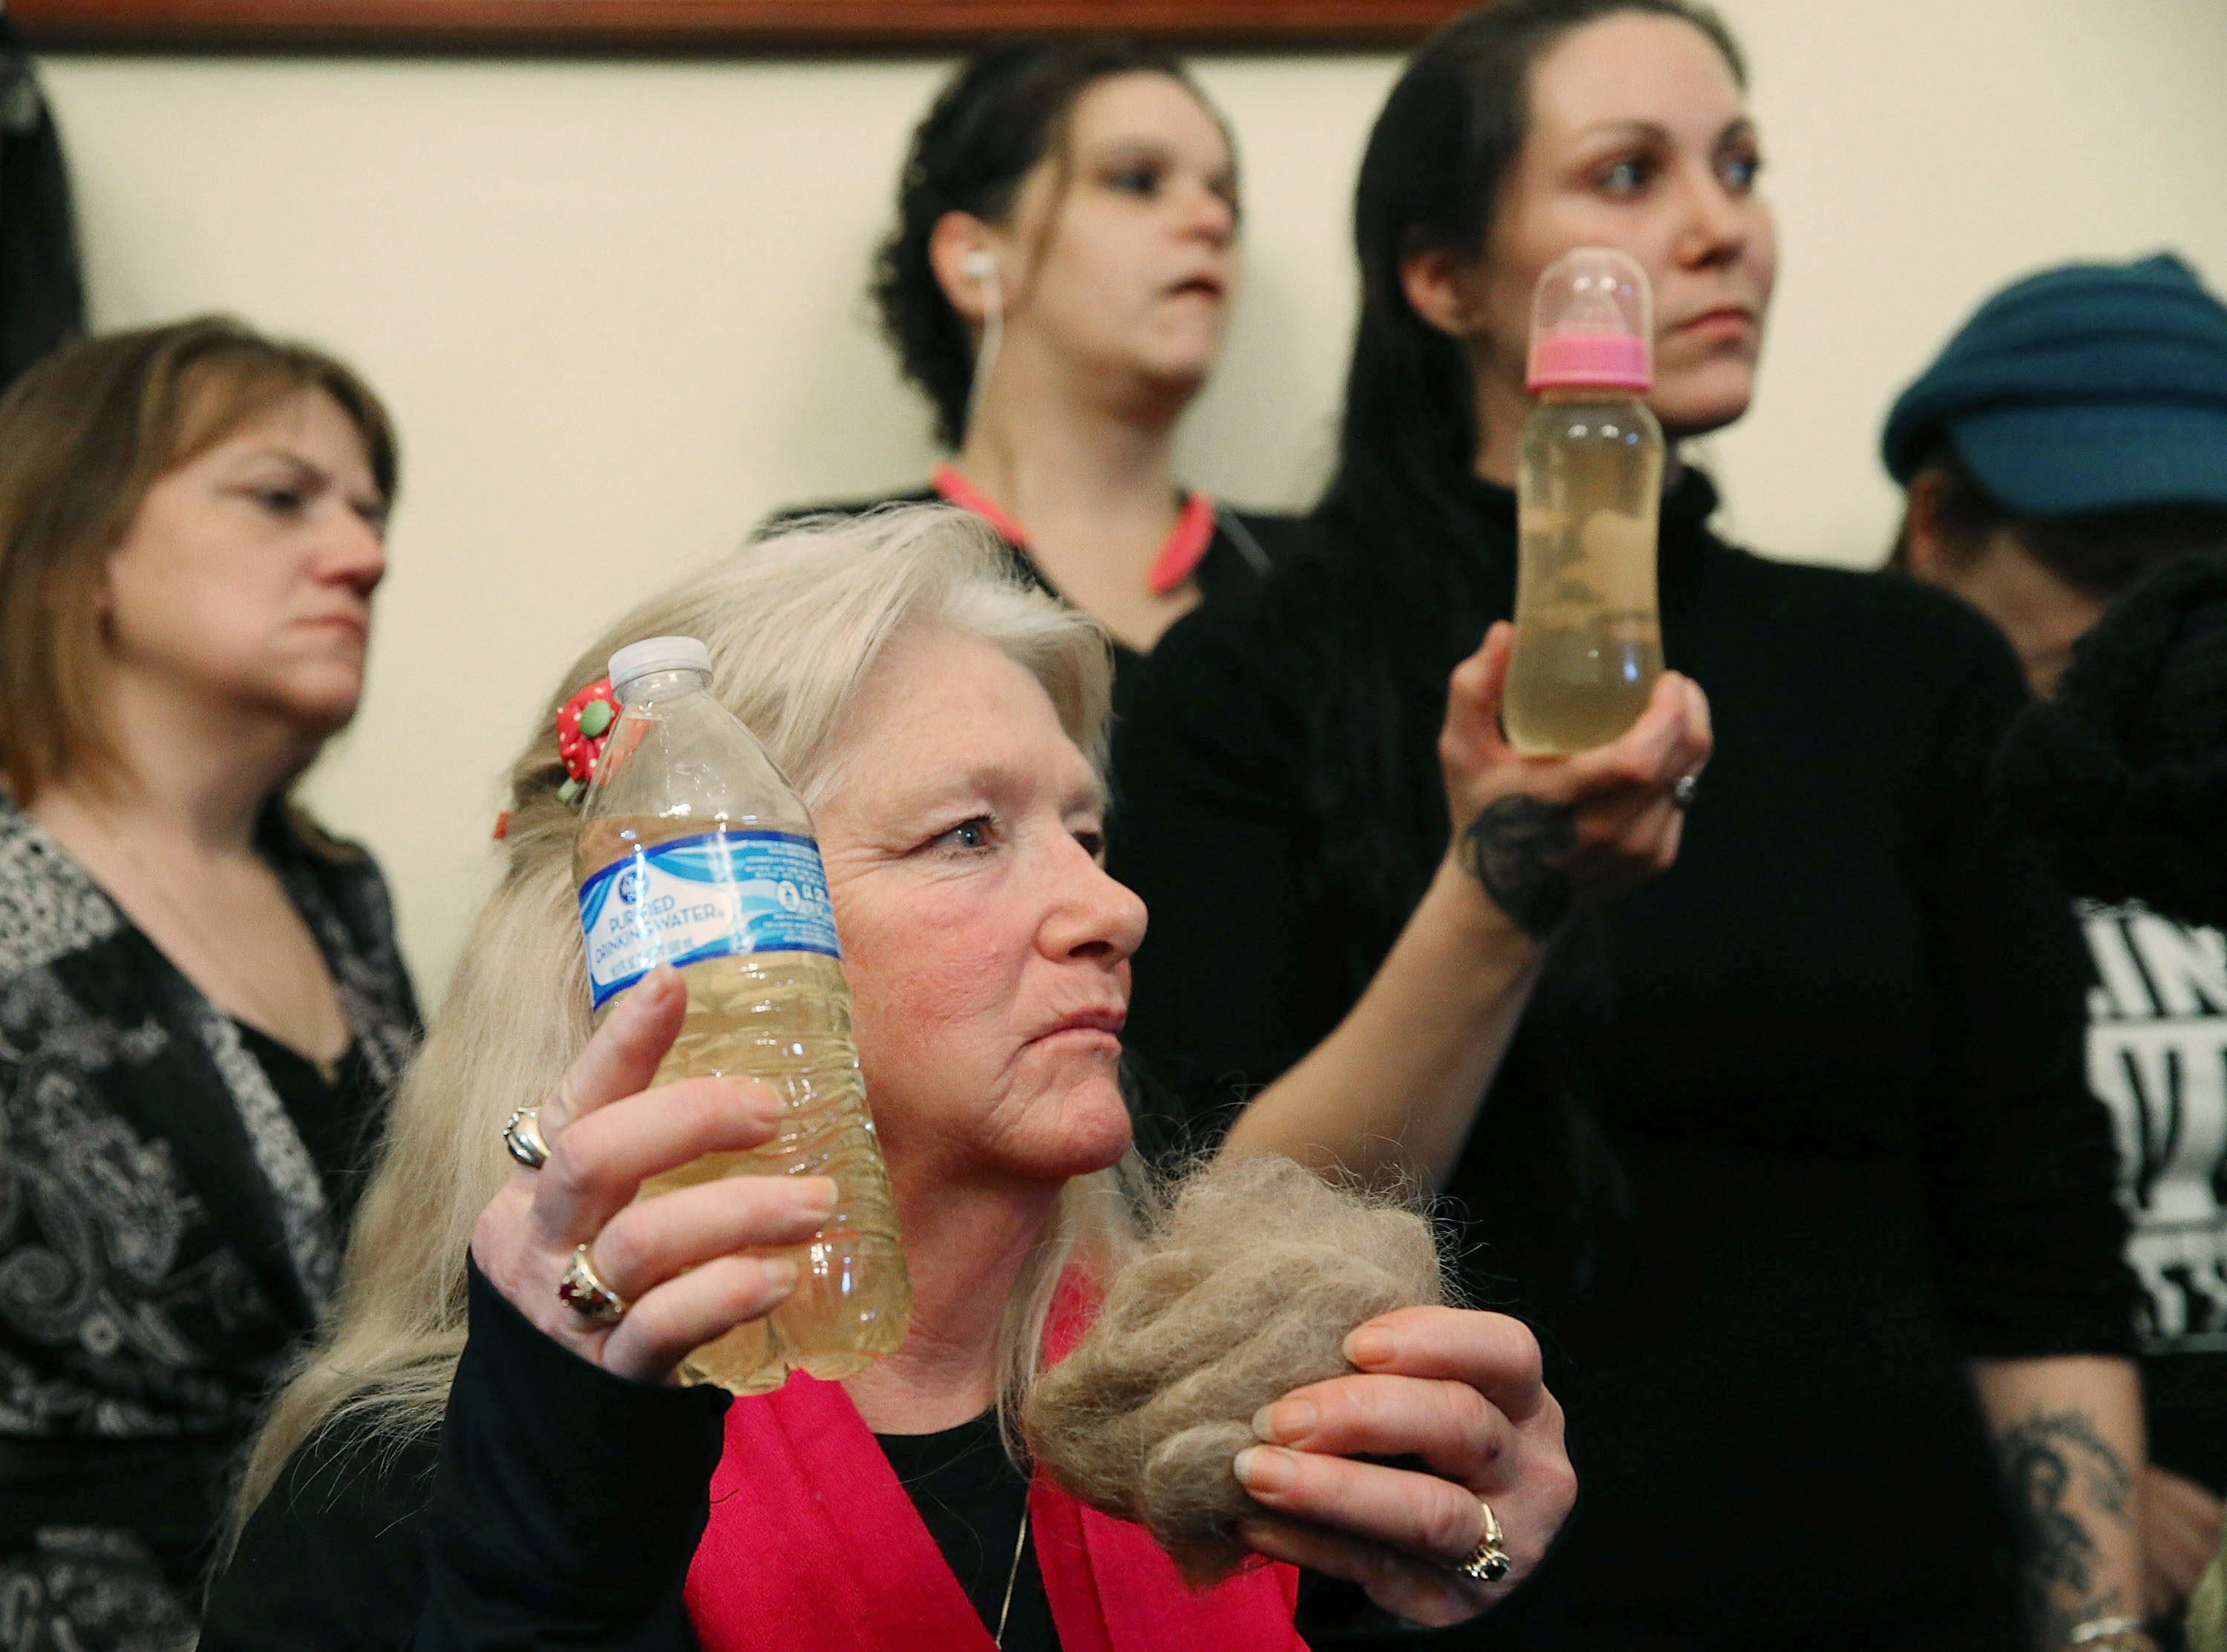 Flint resident Gladyes Williamson holds a bottle full of contaminated water, and a clump of her hair, alongside Jessica Owens, holding a baby bottle full of contaminated water, during a news conference after attending a House Oversight and Government Reform Committee hearing on the Flint, Michigan water crisis on Capitol Hill February 3, 2016 in Washington, DC.  (Getty)